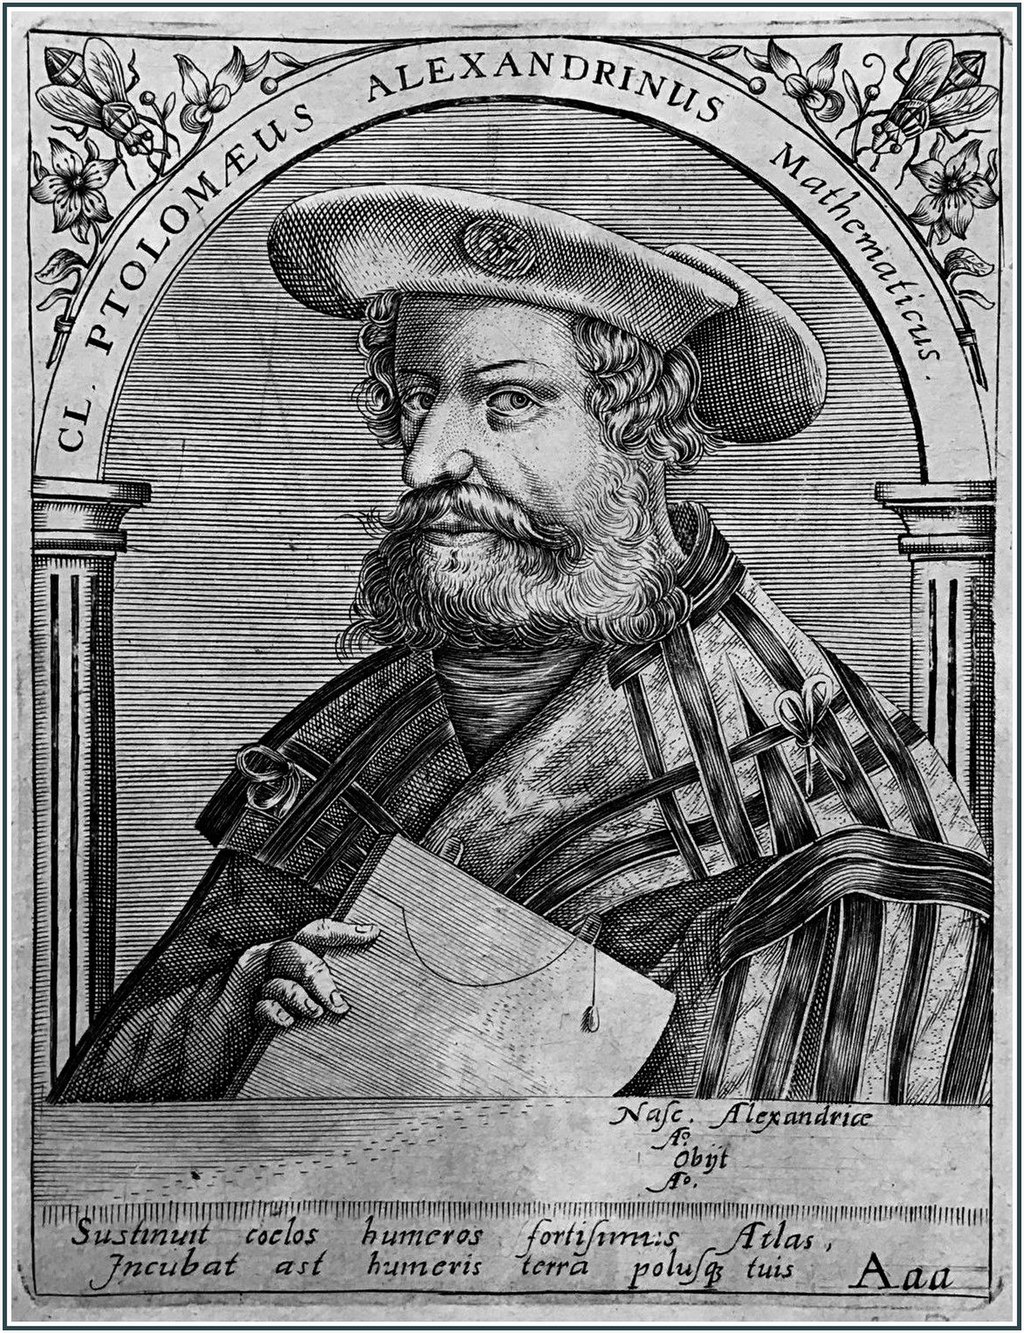 A 16th century engraving of Claudius Ptolemy, mathematician and astronomer who created a geocentric model of the solar system and wrote the Almagest, one of the most influential scientific texts in history.